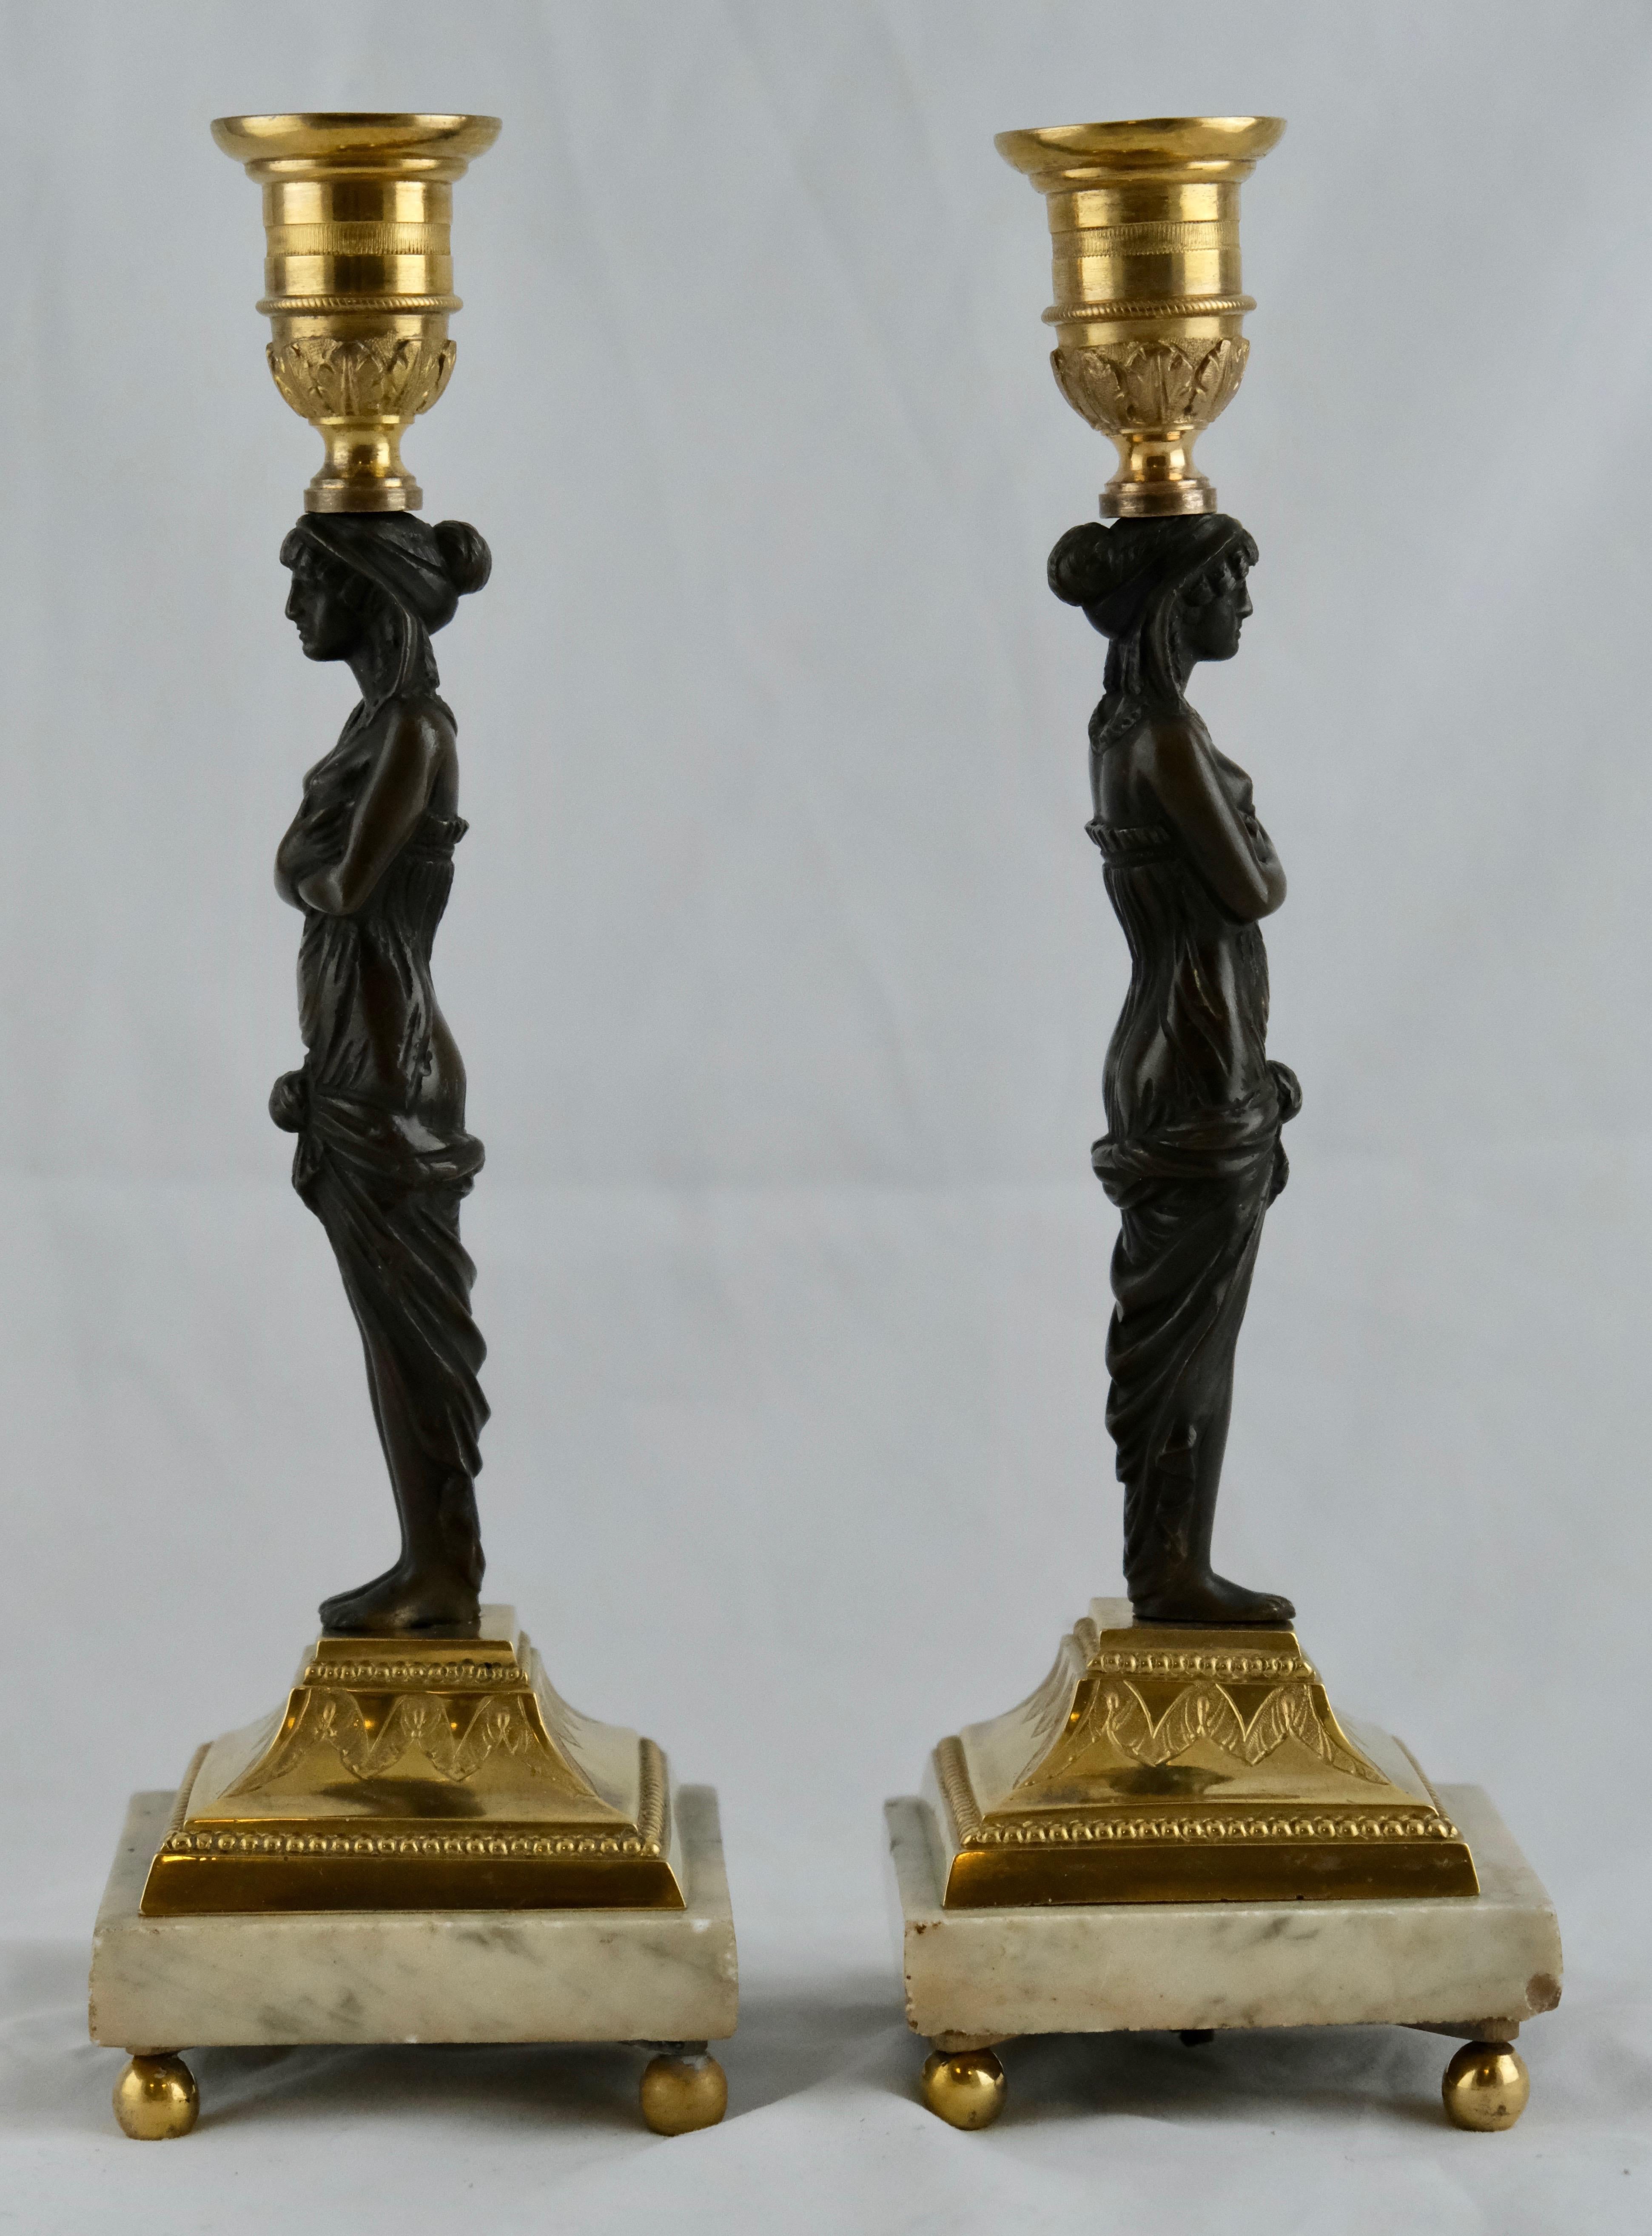 A classical pair of candlesticks made of marble, gilt and blackpatinated bronce. Nicely done and good quality. They would fit any dinnertable or wherever you want to put them.